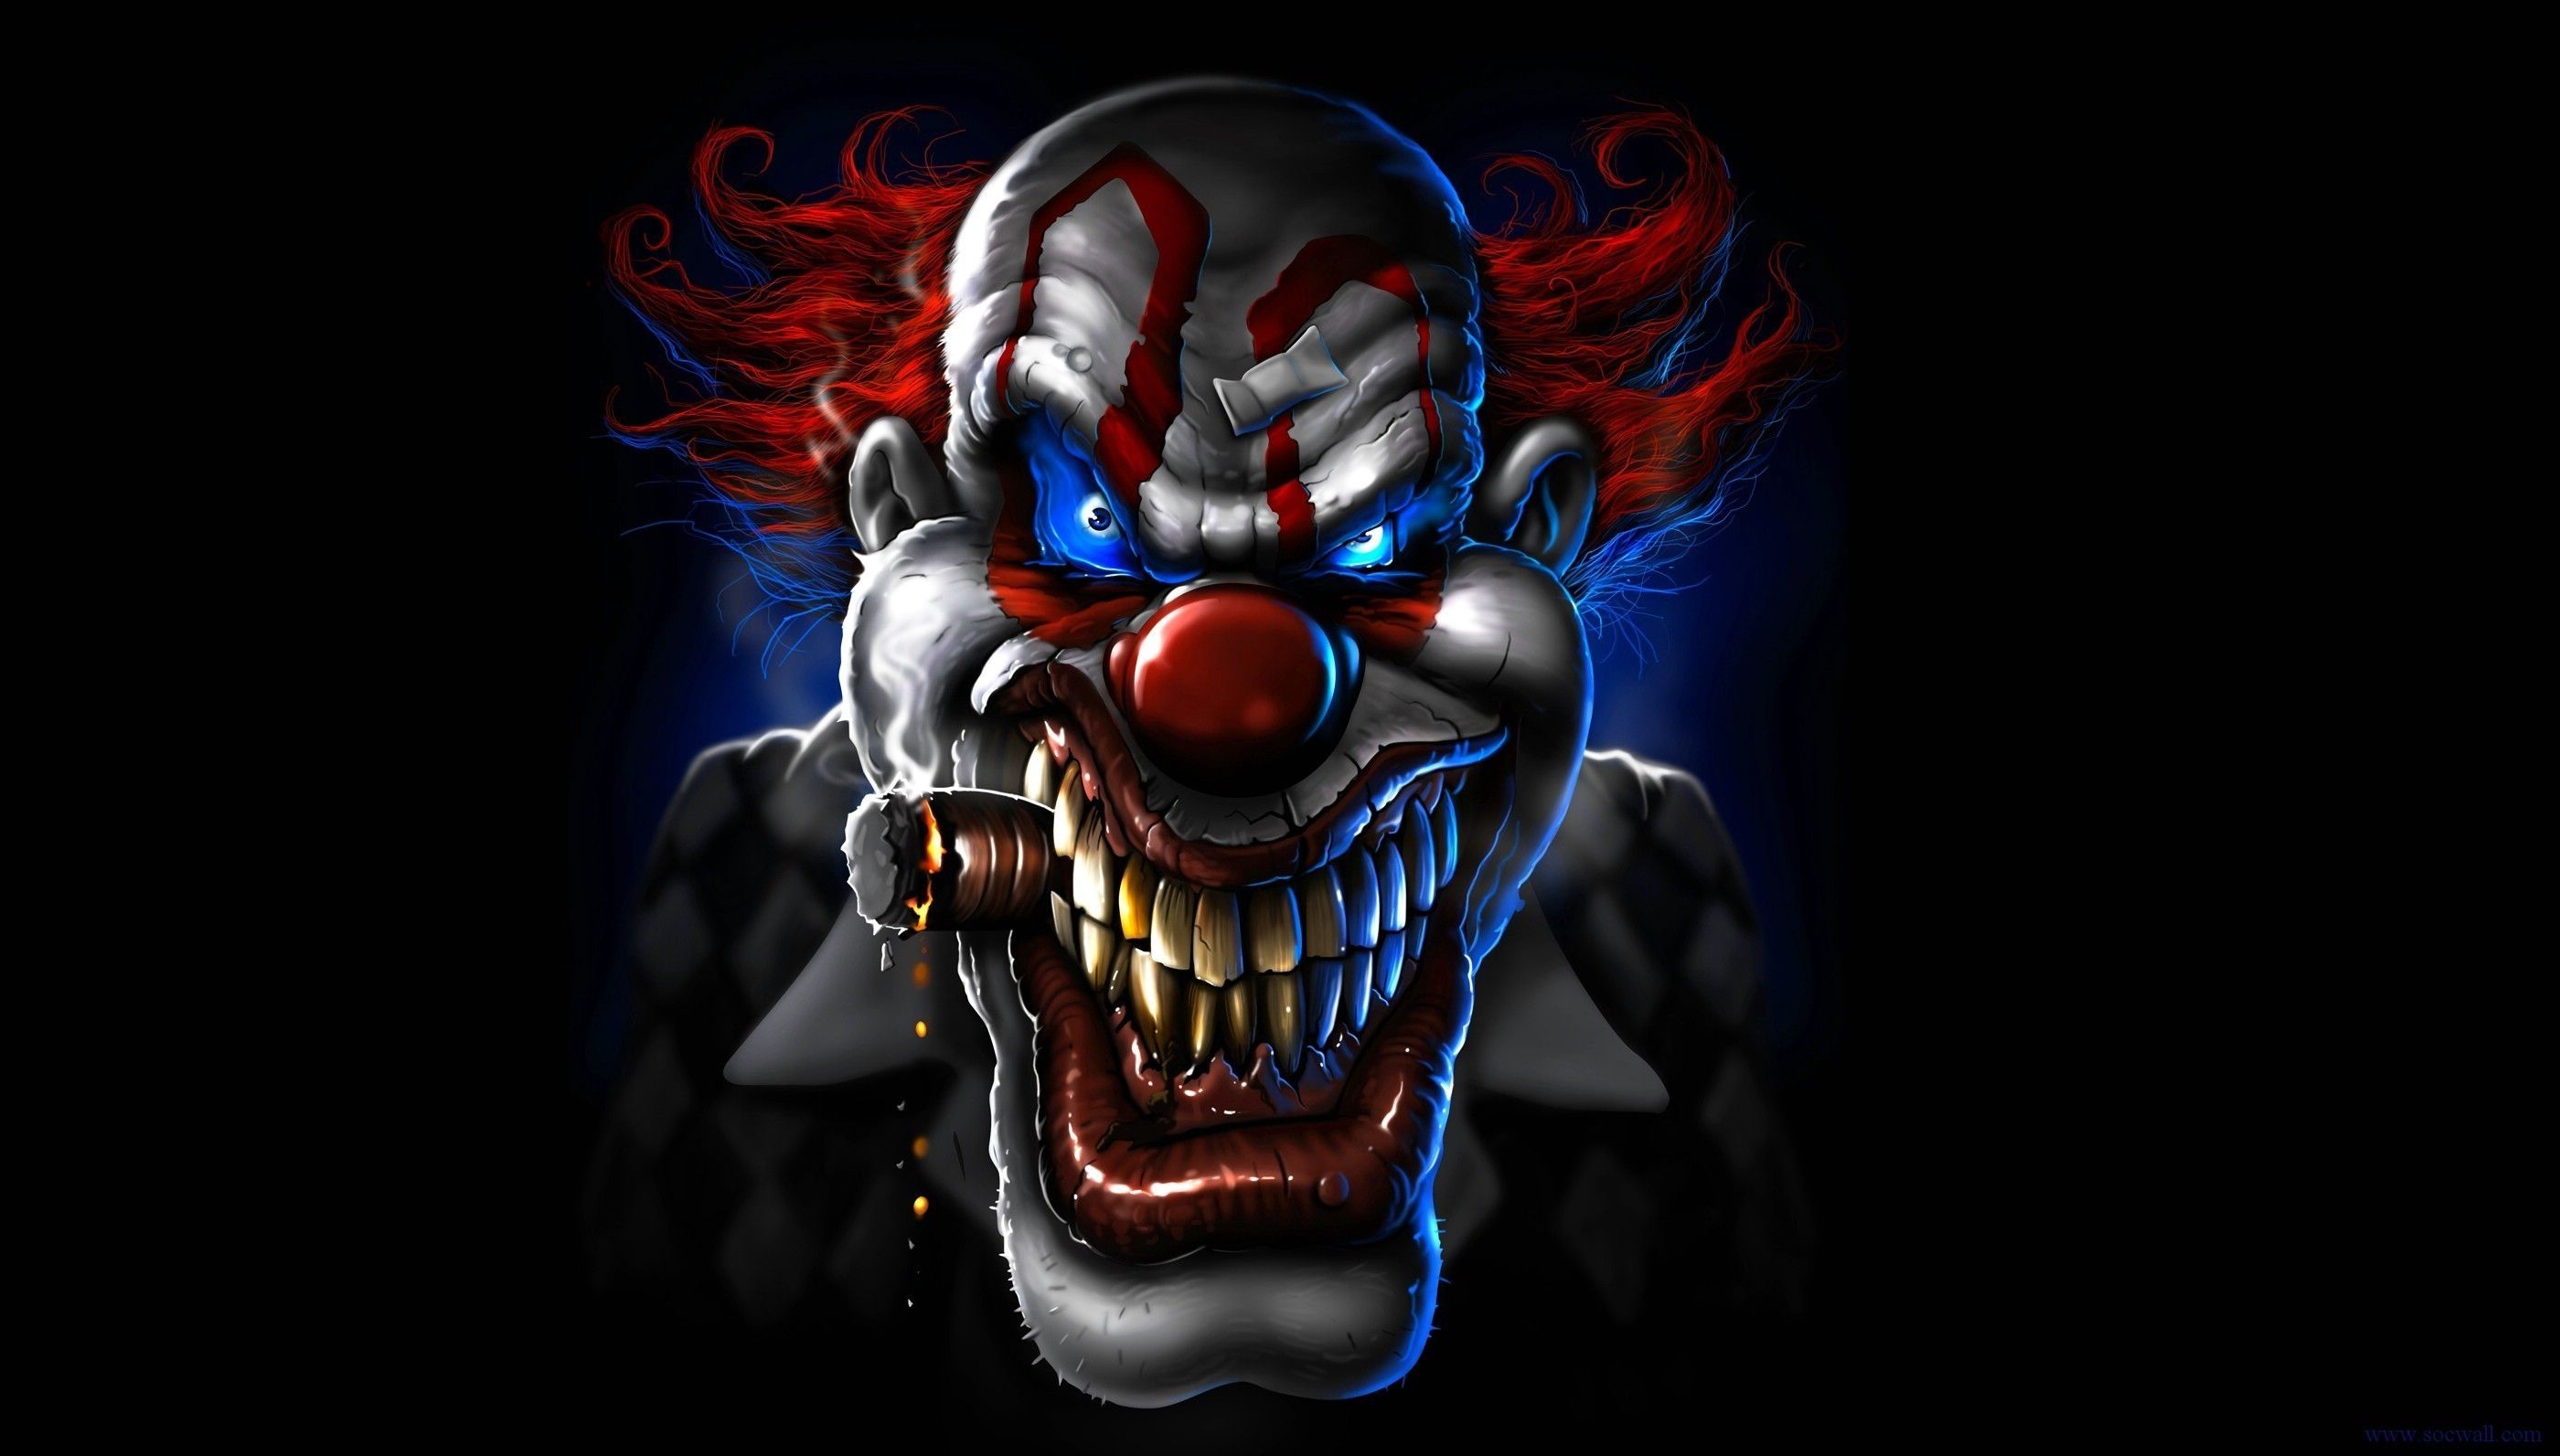 Creepy Clown Wallpaper background picture